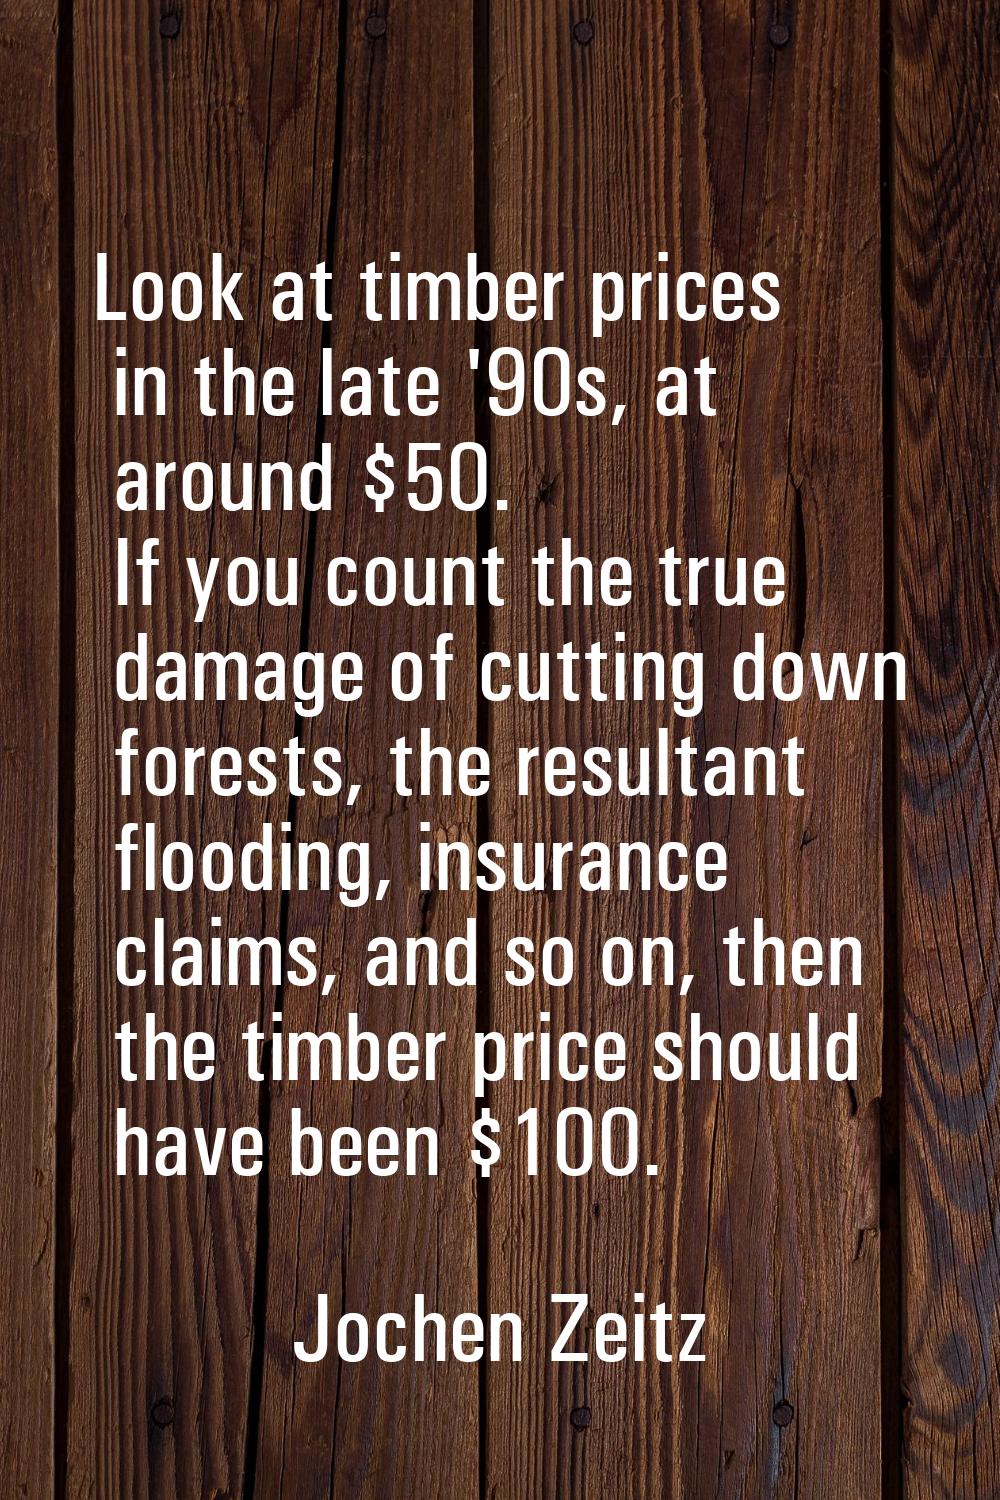 Look at timber prices in the late '90s, at around $50. If you count the true damage of cutting down